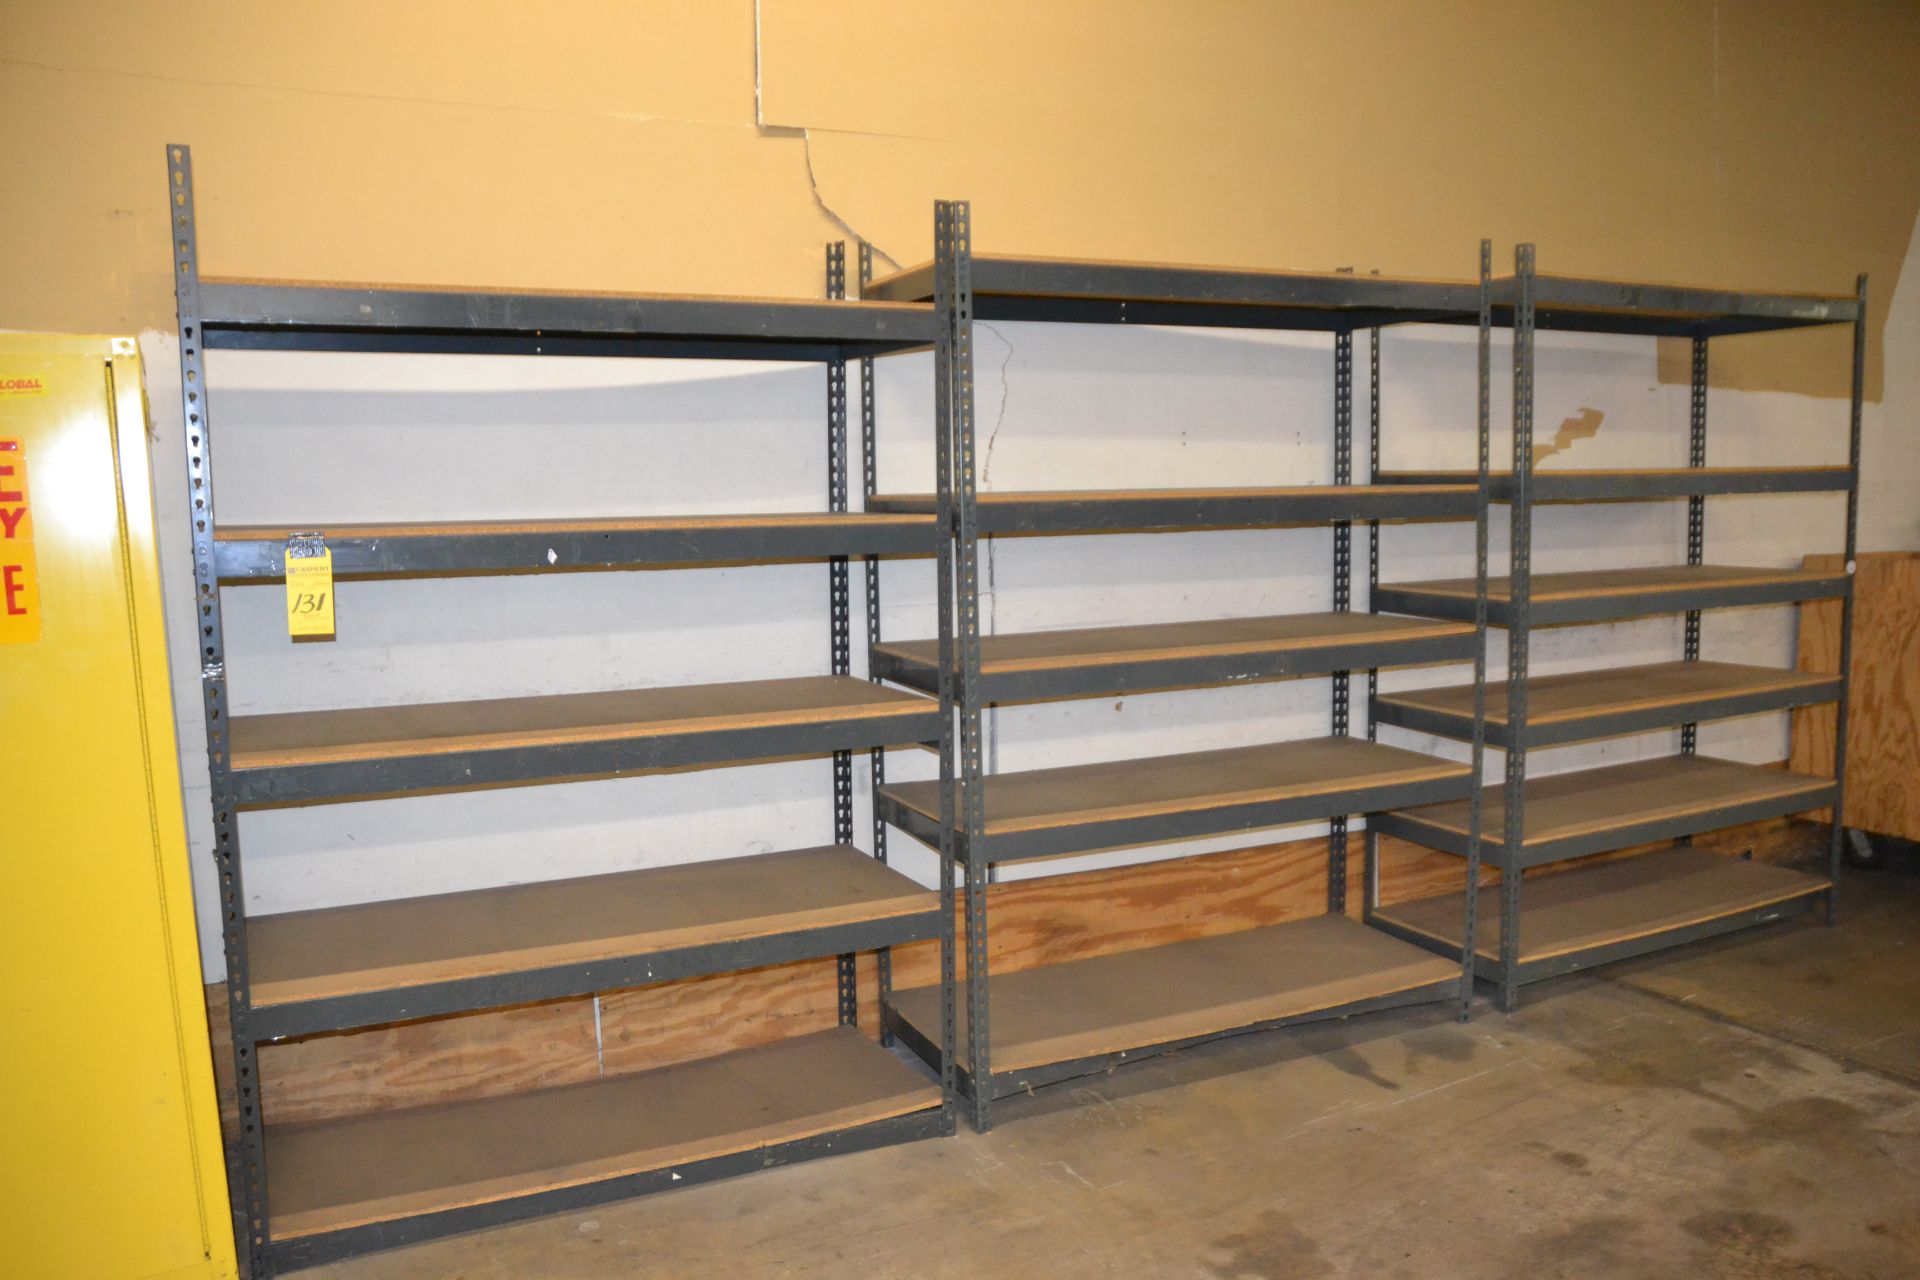 SECTIONS OF METAL SHELVING